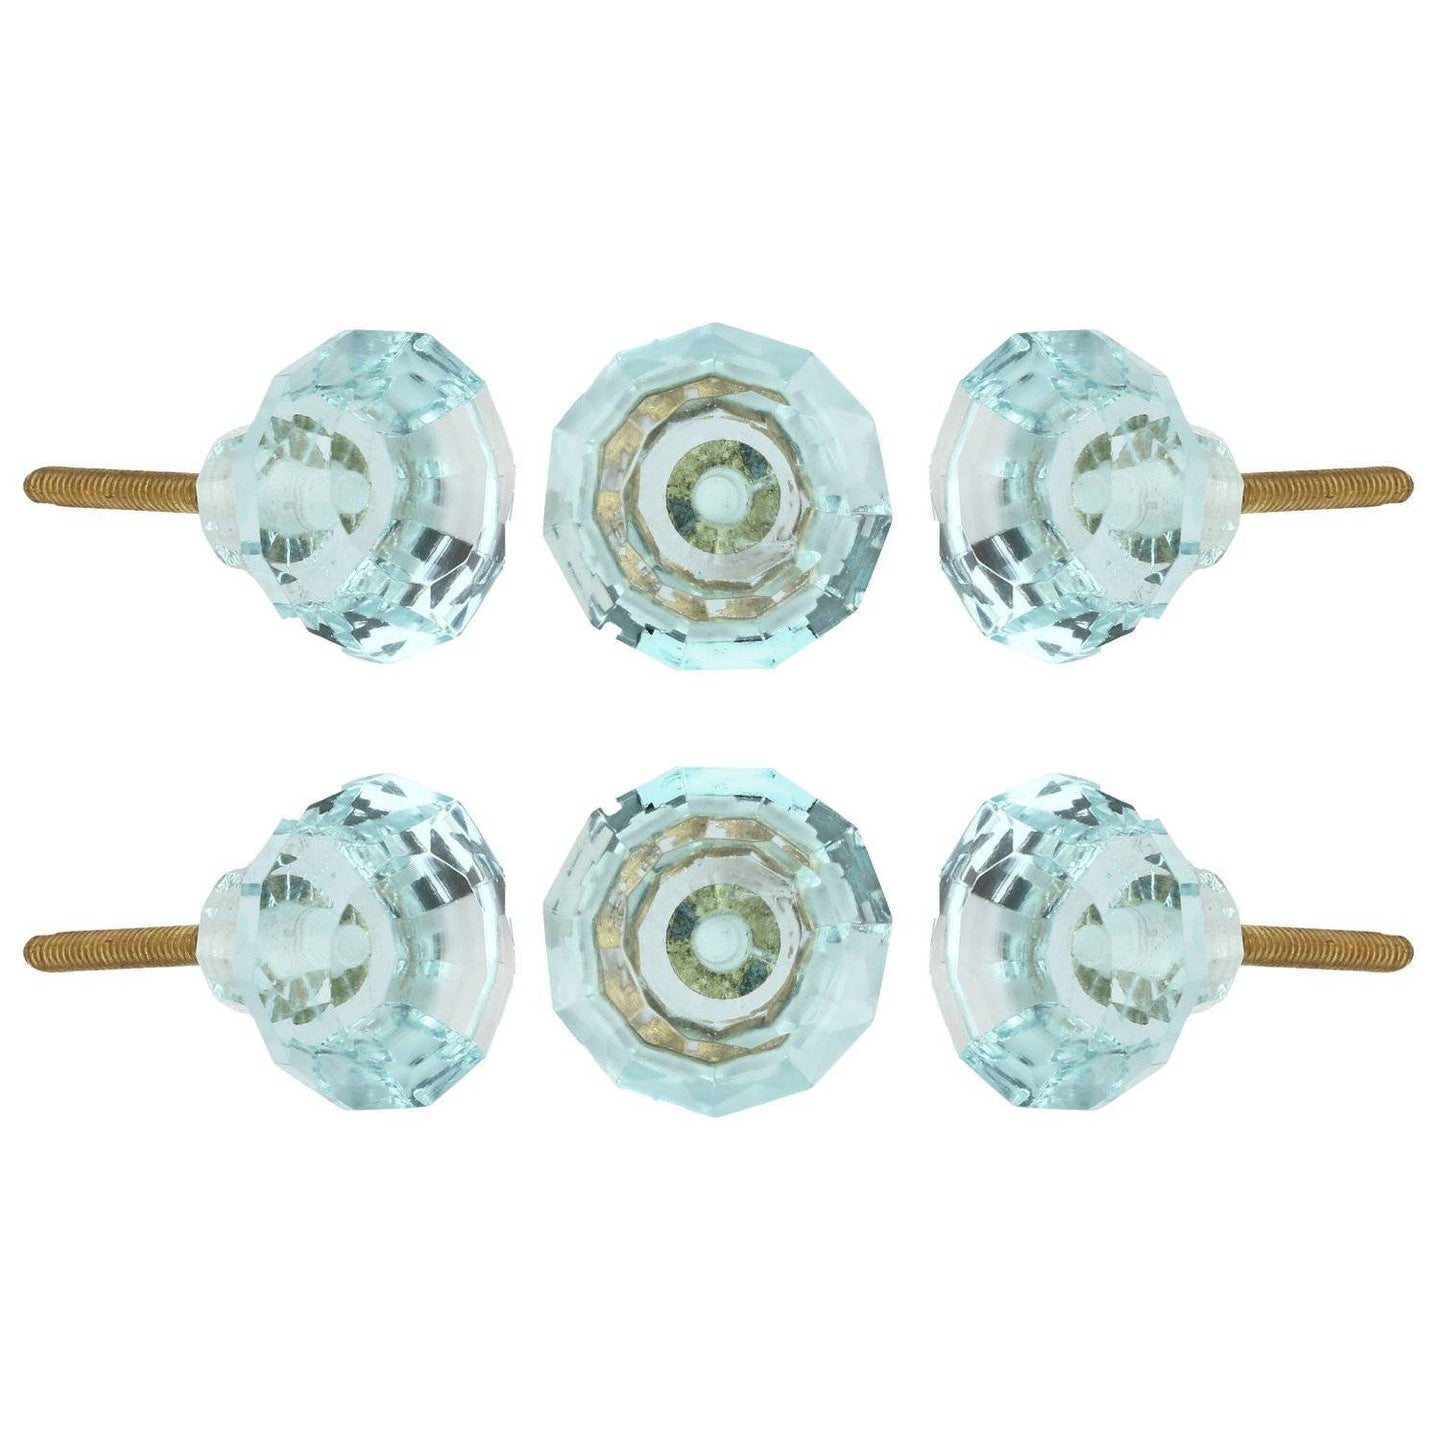 Turquoise Cut Glass Knobs Set Of 6 - Perilla Home